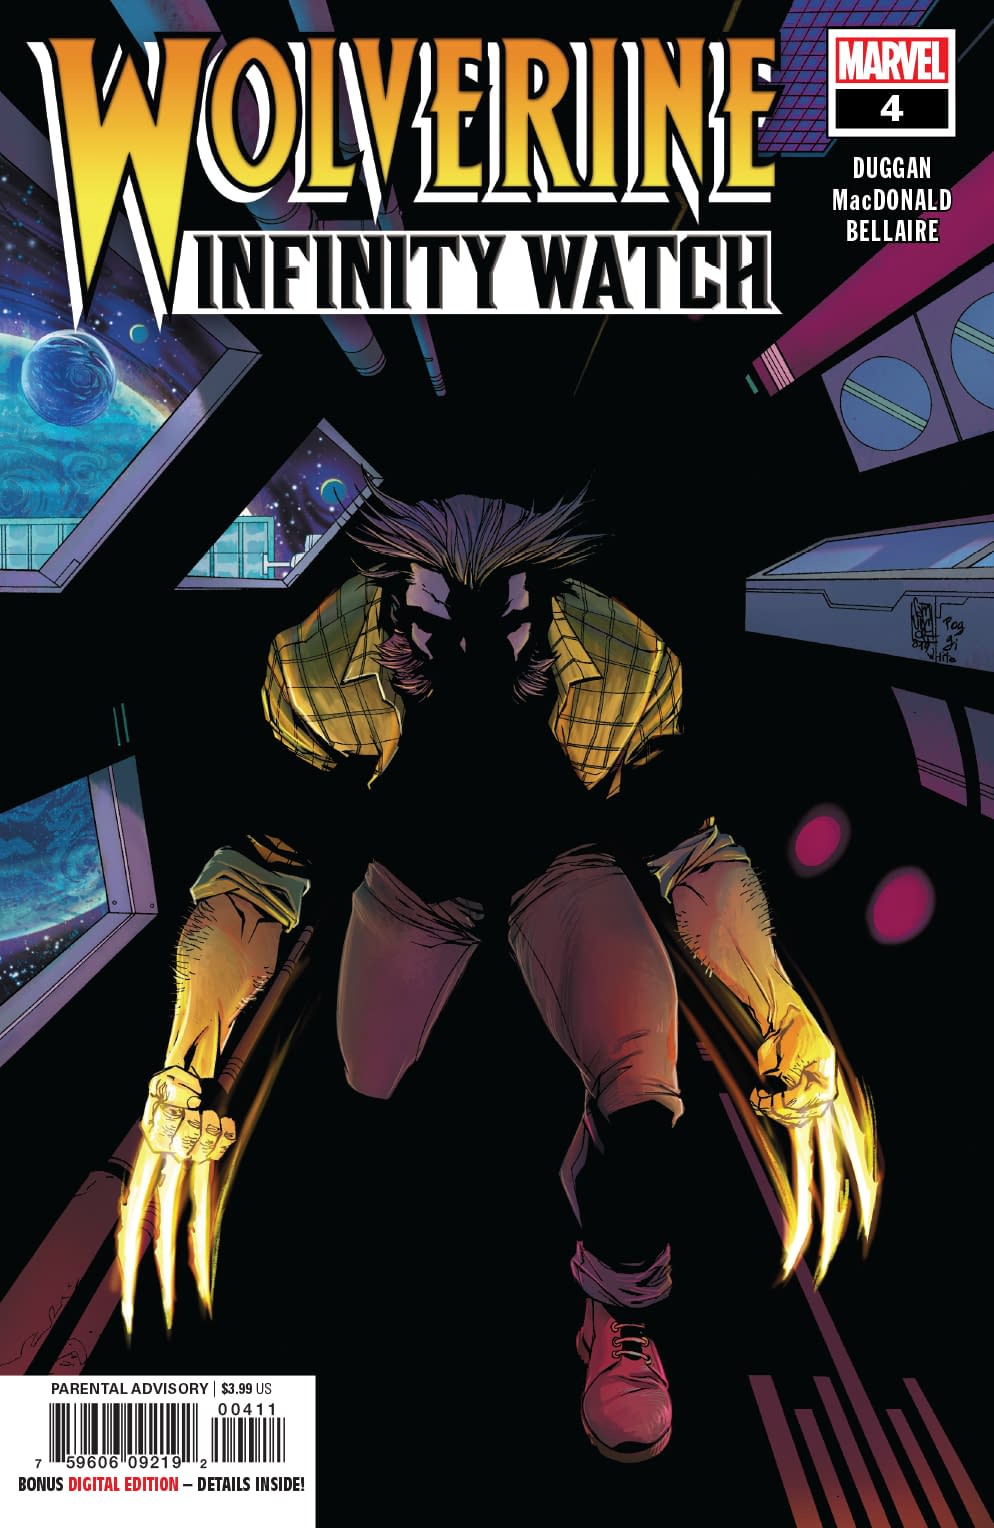 Logan's Healing Factor is Stronger Than Ever - Wolverine Infinity Watch #4 Preview